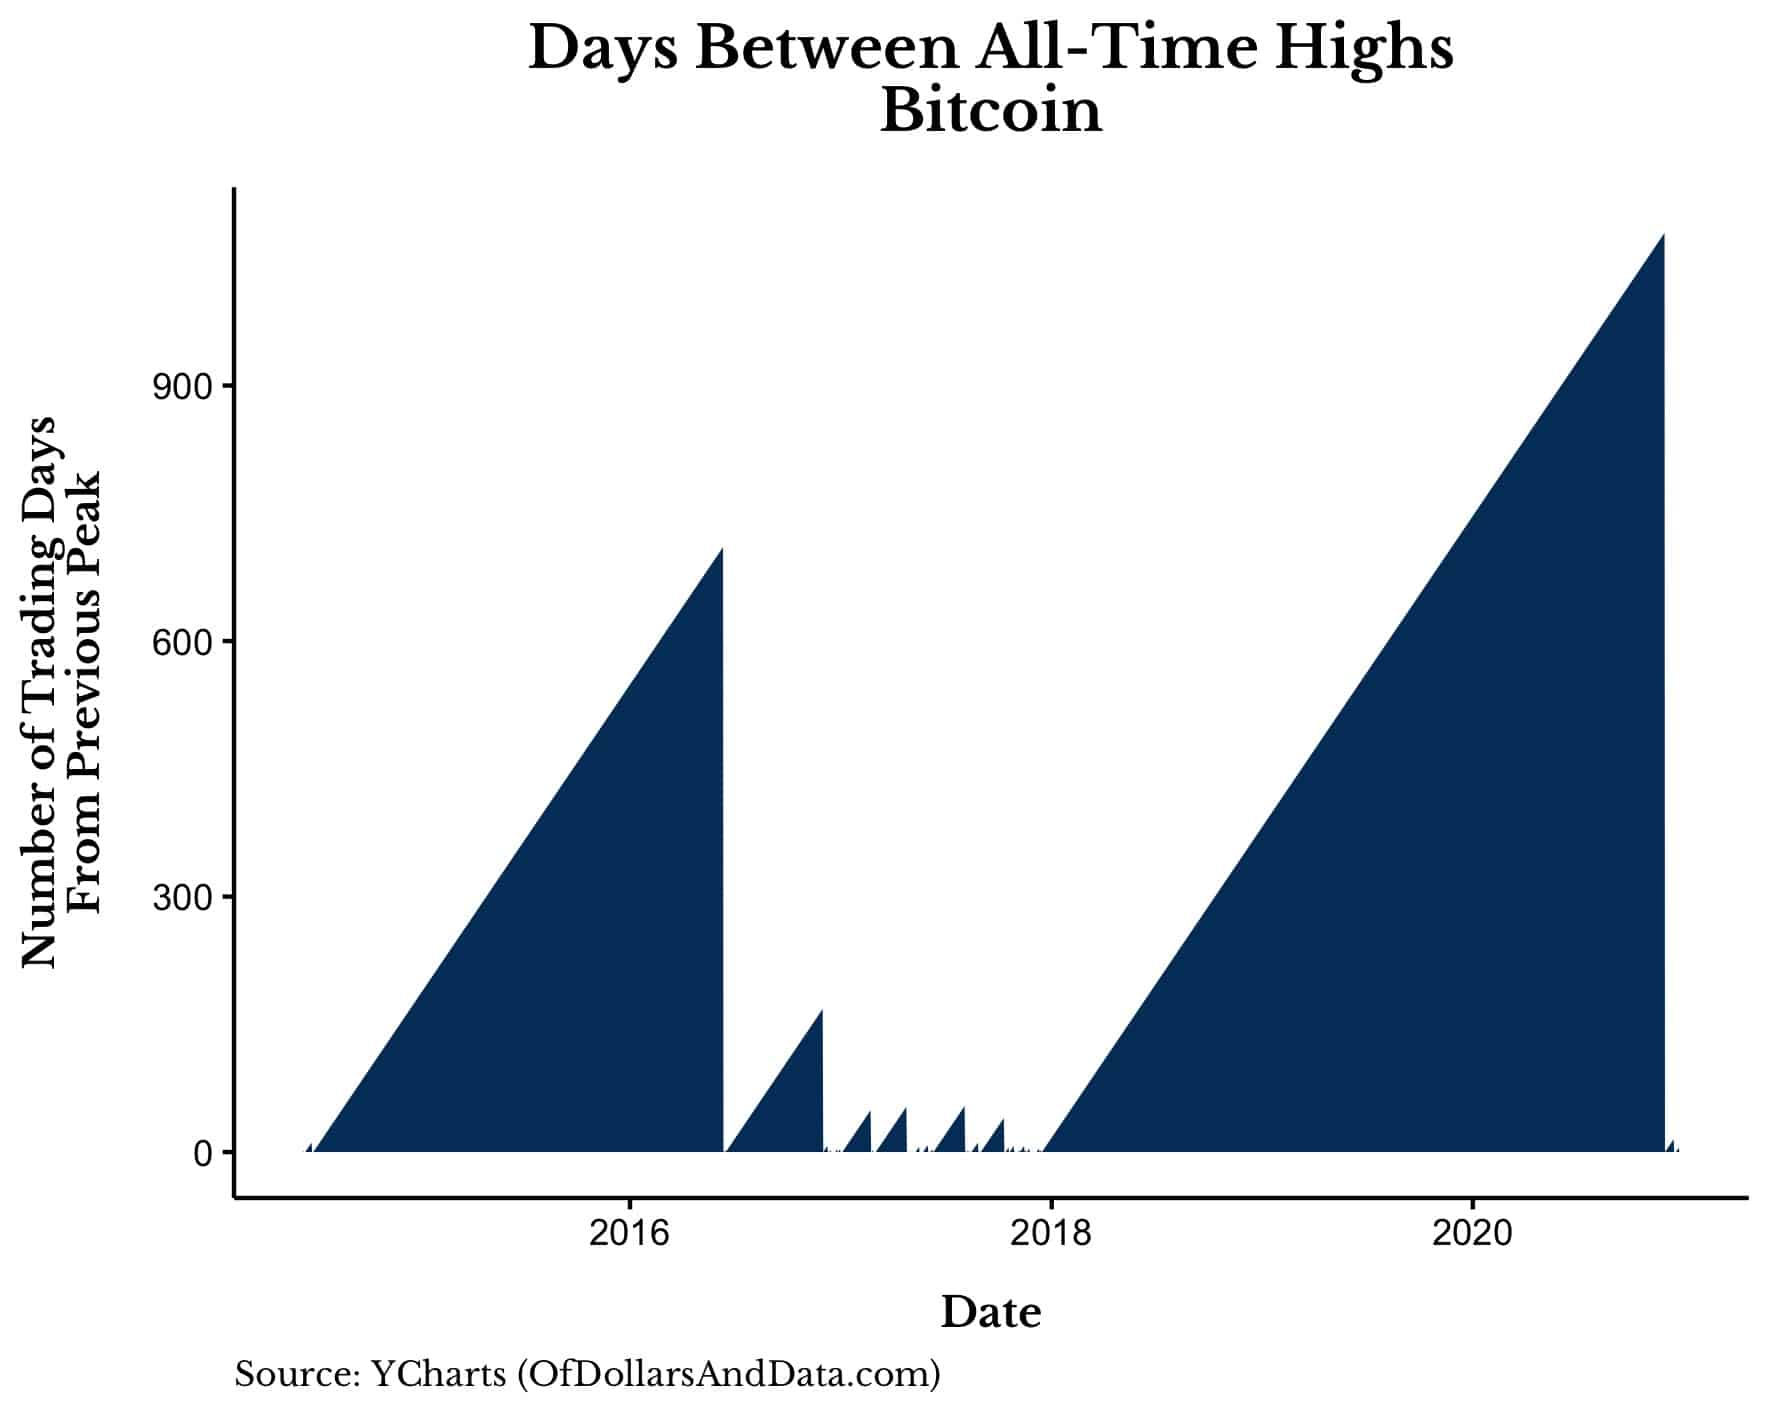 Days between Bitcoin all-time highs